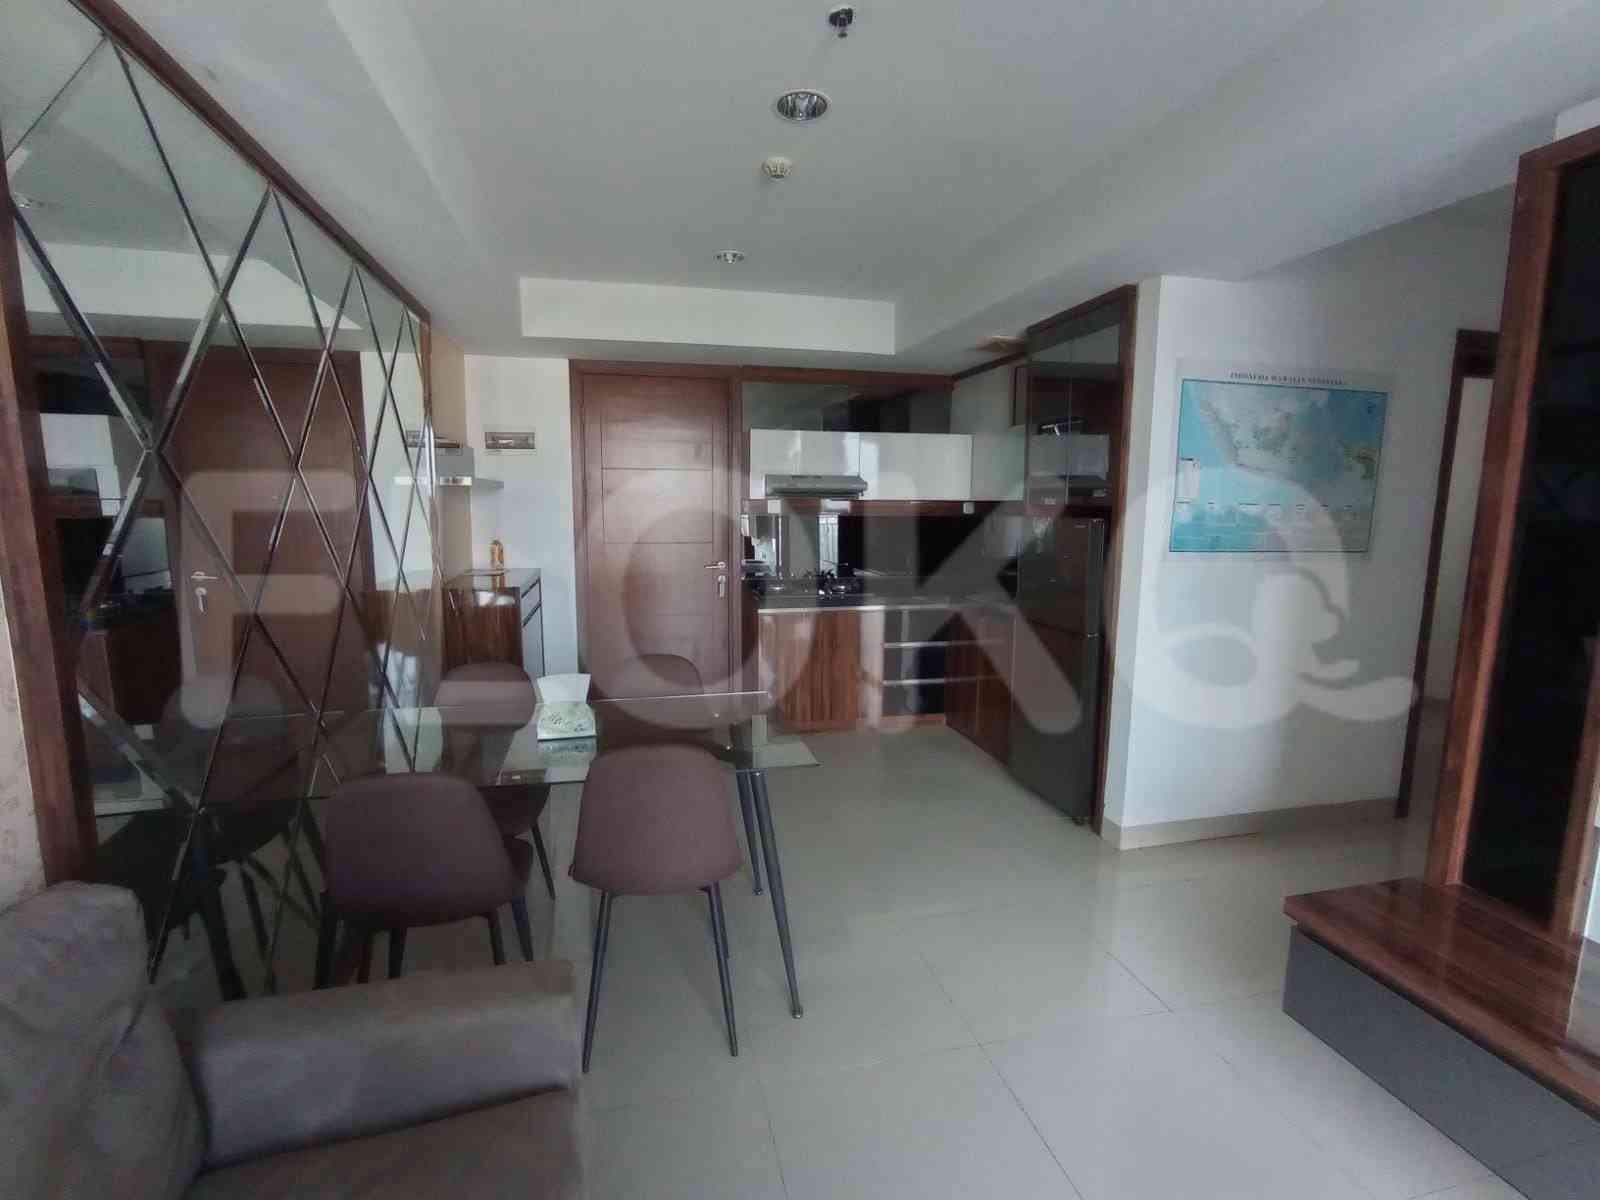 3 Bedroom on 13th Floor for Rent in Springhill Terrace Residence - fpaaa7 6